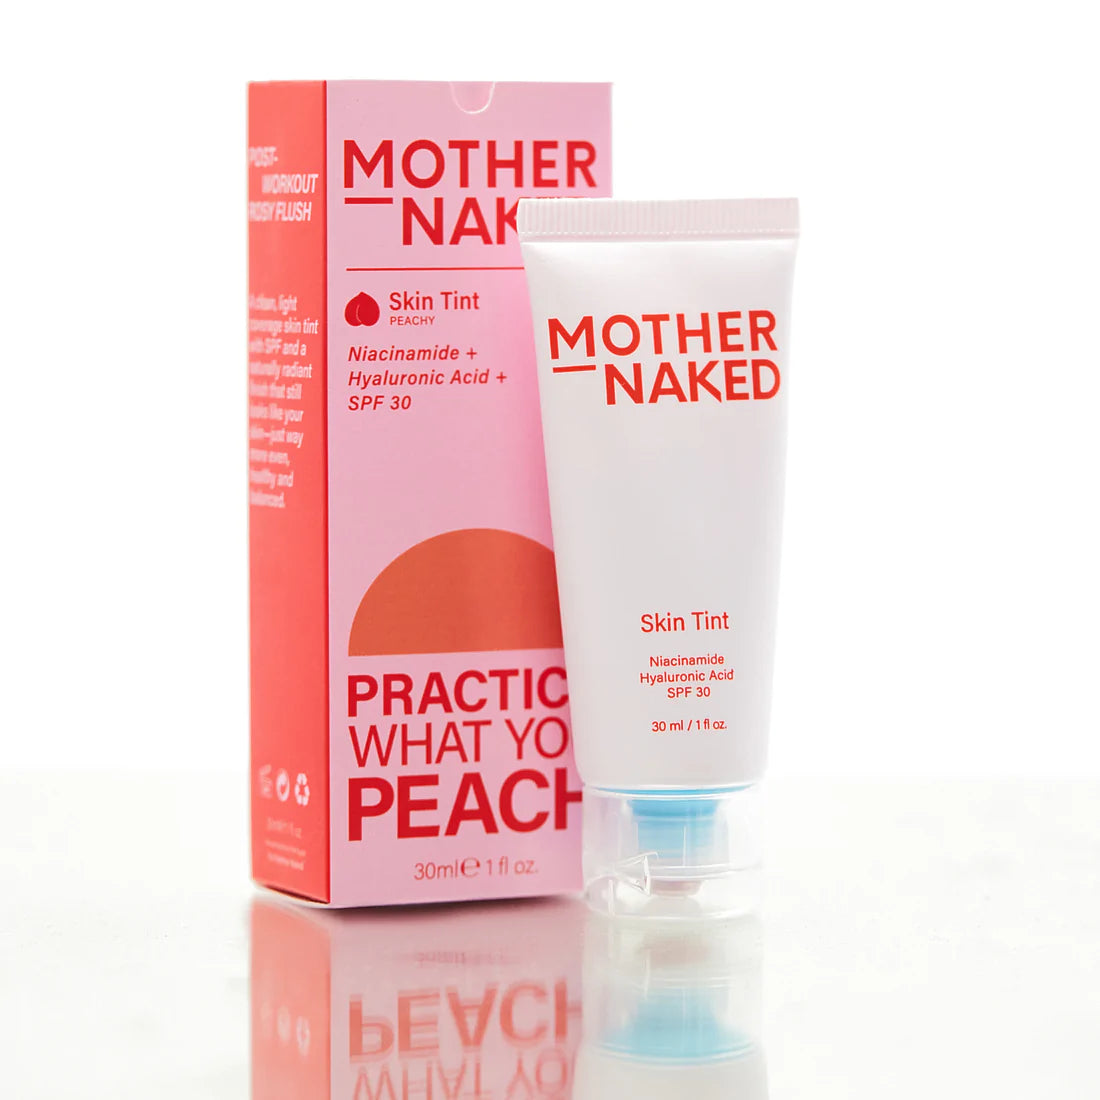 Peach Tinted Moisturizer SPF 30 Niacinamide & Hyaluronic Acid by Mother Naked on ZYNAH Egypt